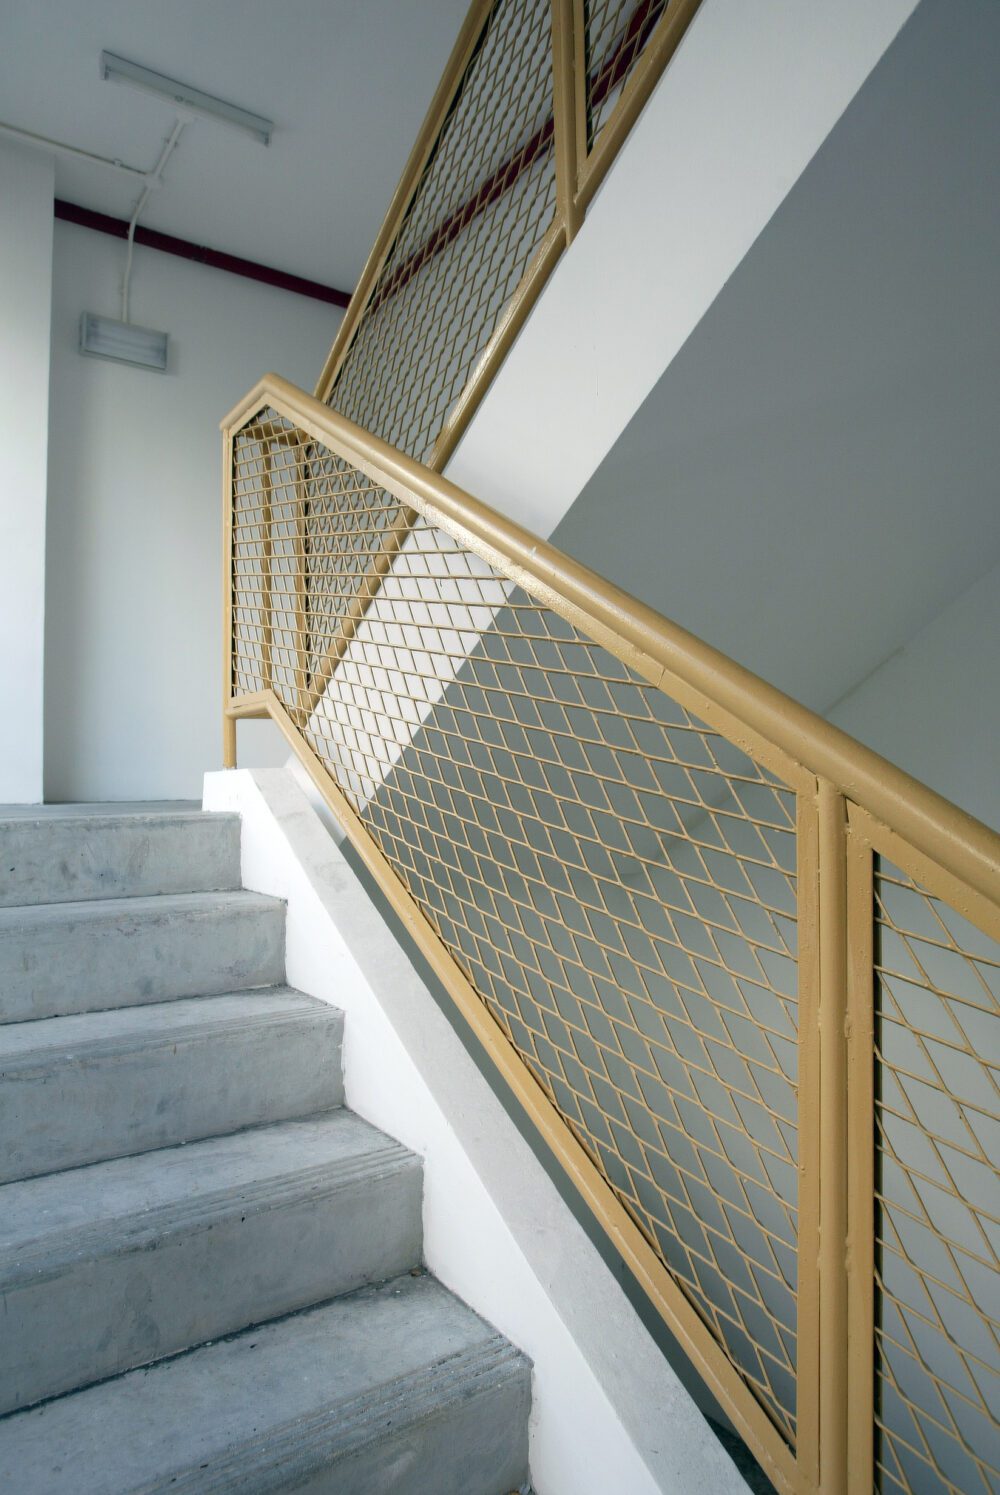 Diamond expanded net application: Stair safety net